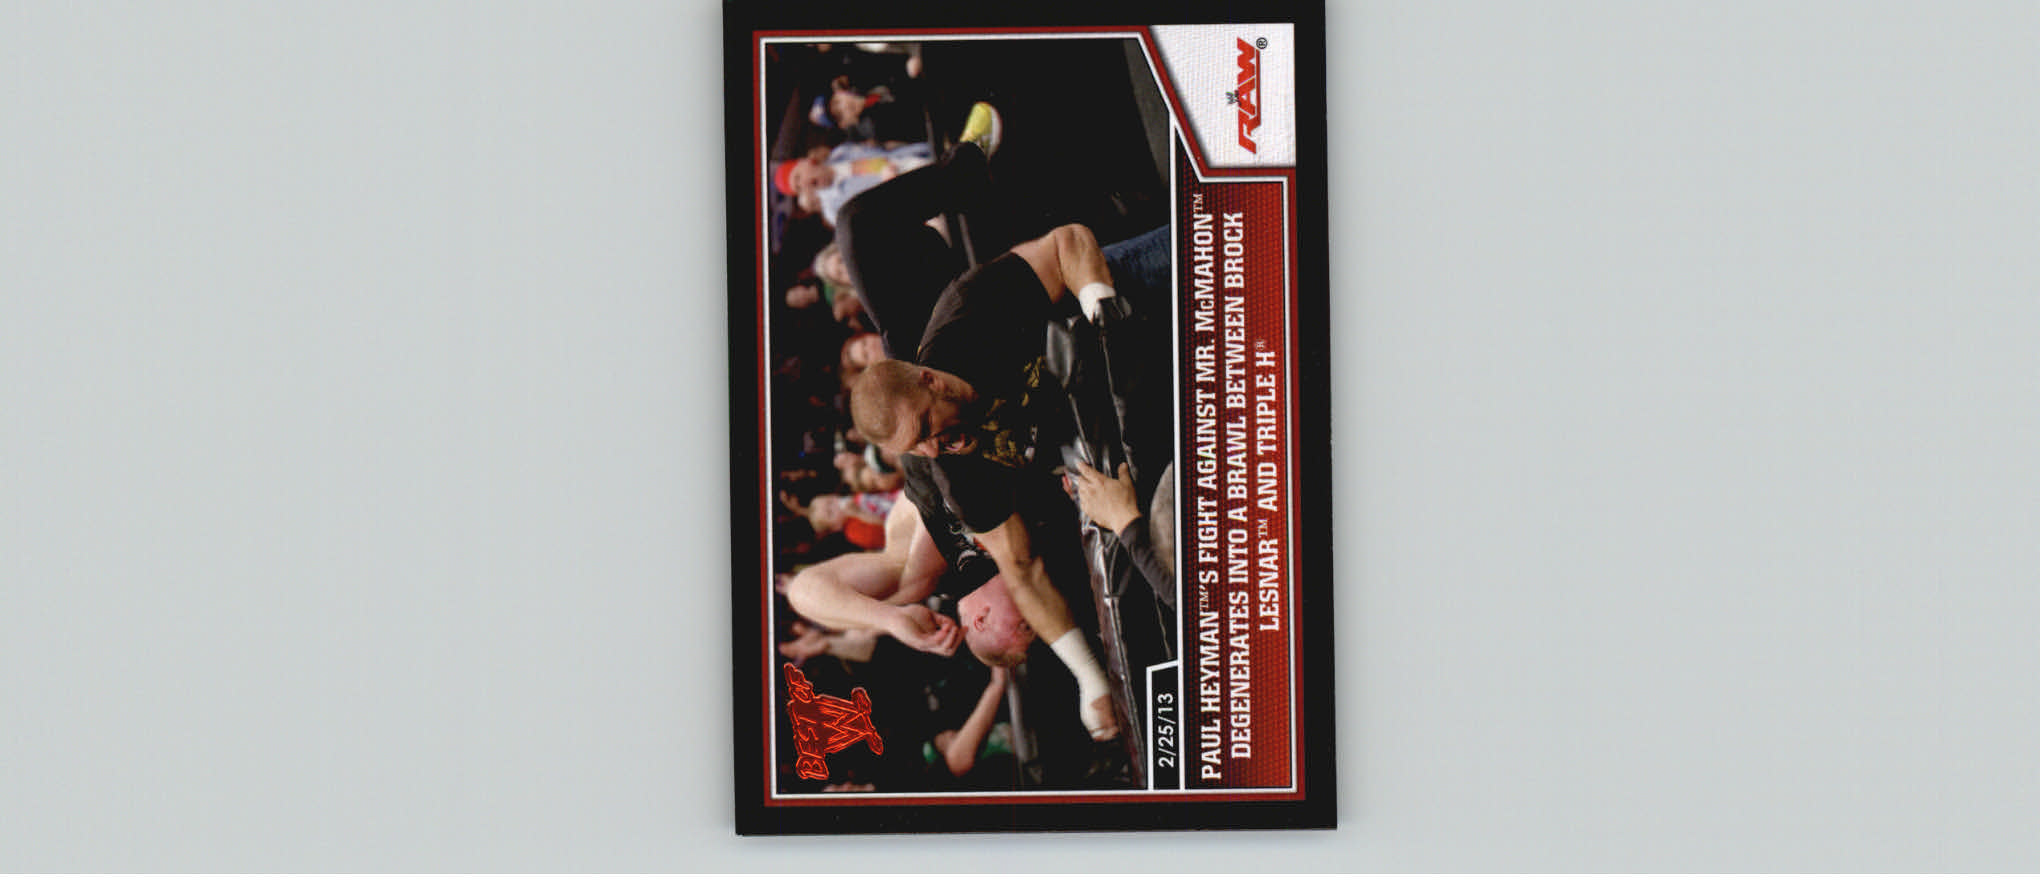 2013 Topps Best of WWE #92 Paul Heymans Fight Against Mr. McMahon Degenerates into a Brawl Between Brock Lesnar and Triple H